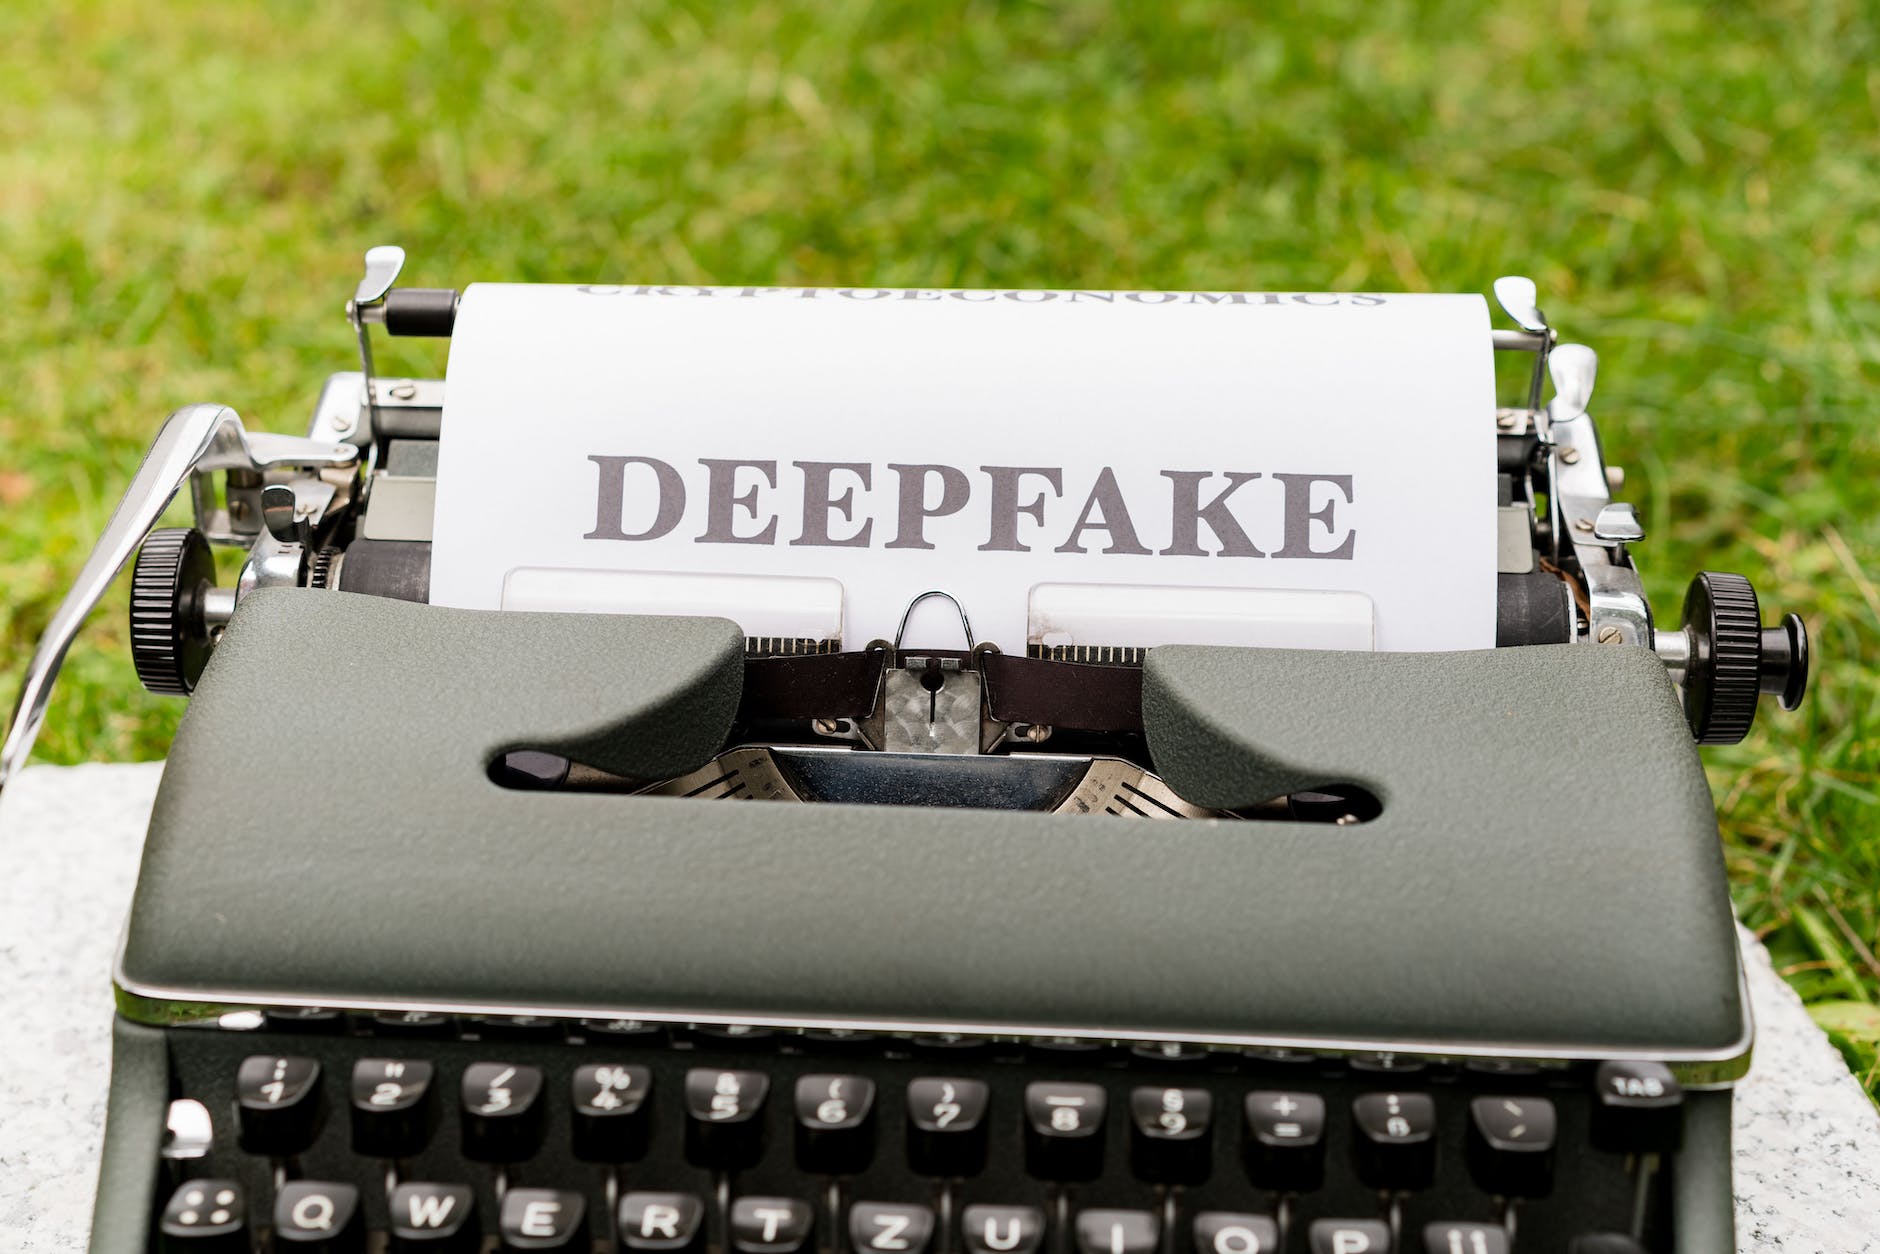 How to Do Deep Fake: A Beginner’s Guide